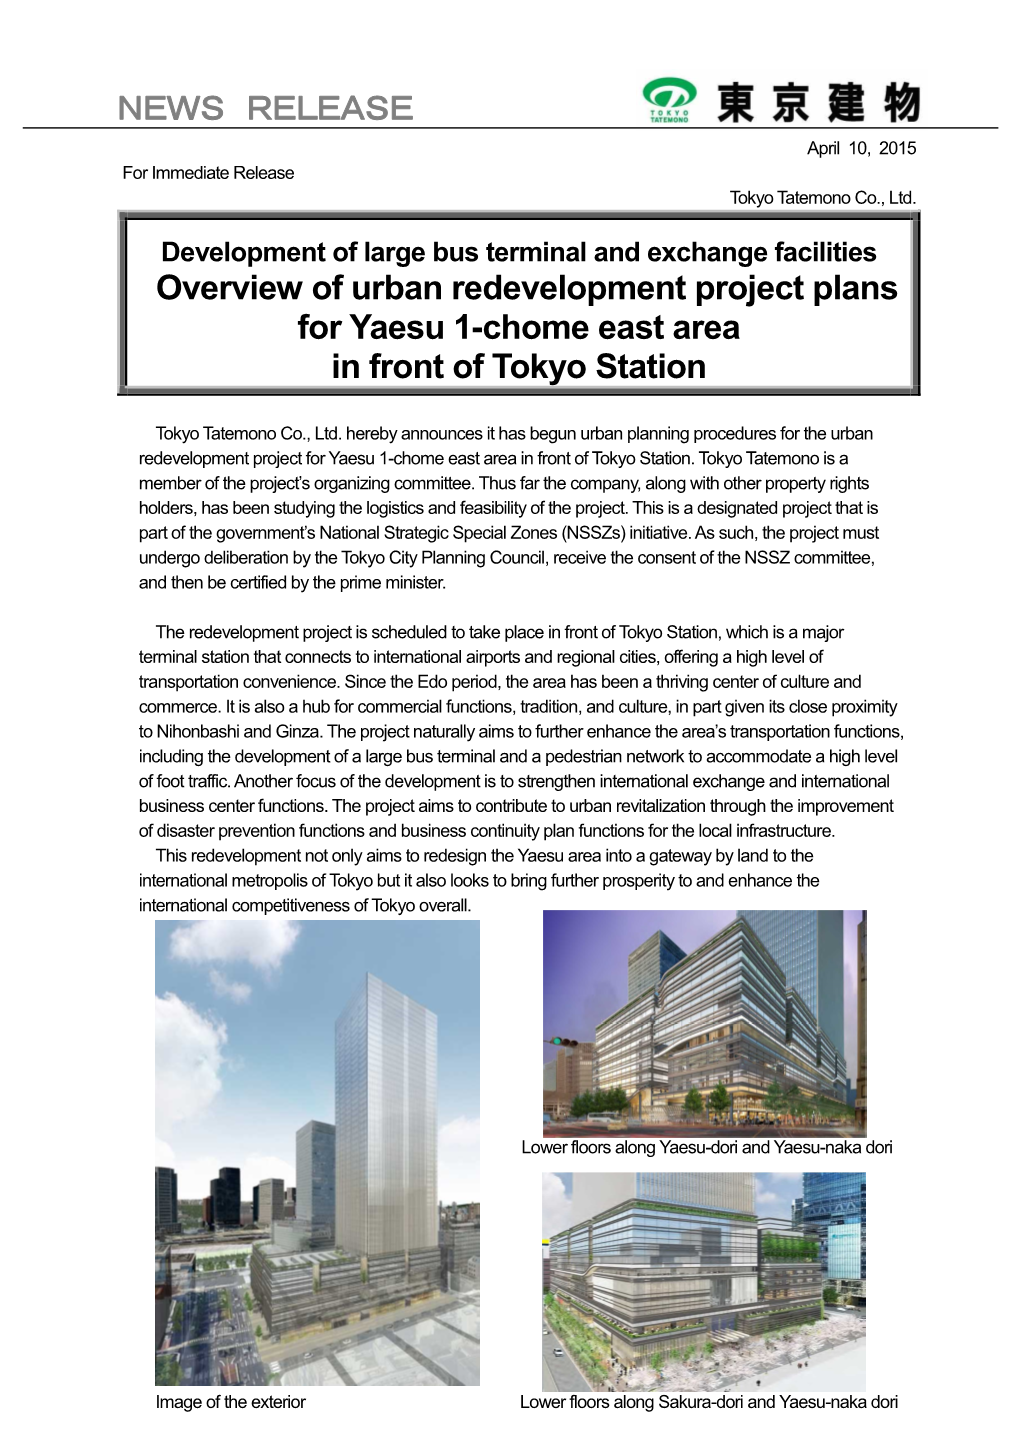 Overview of Urban Redevelopment Project Plans for Yaesu 1-Chome East Area in Front of Tokyo Station NEWS RELE